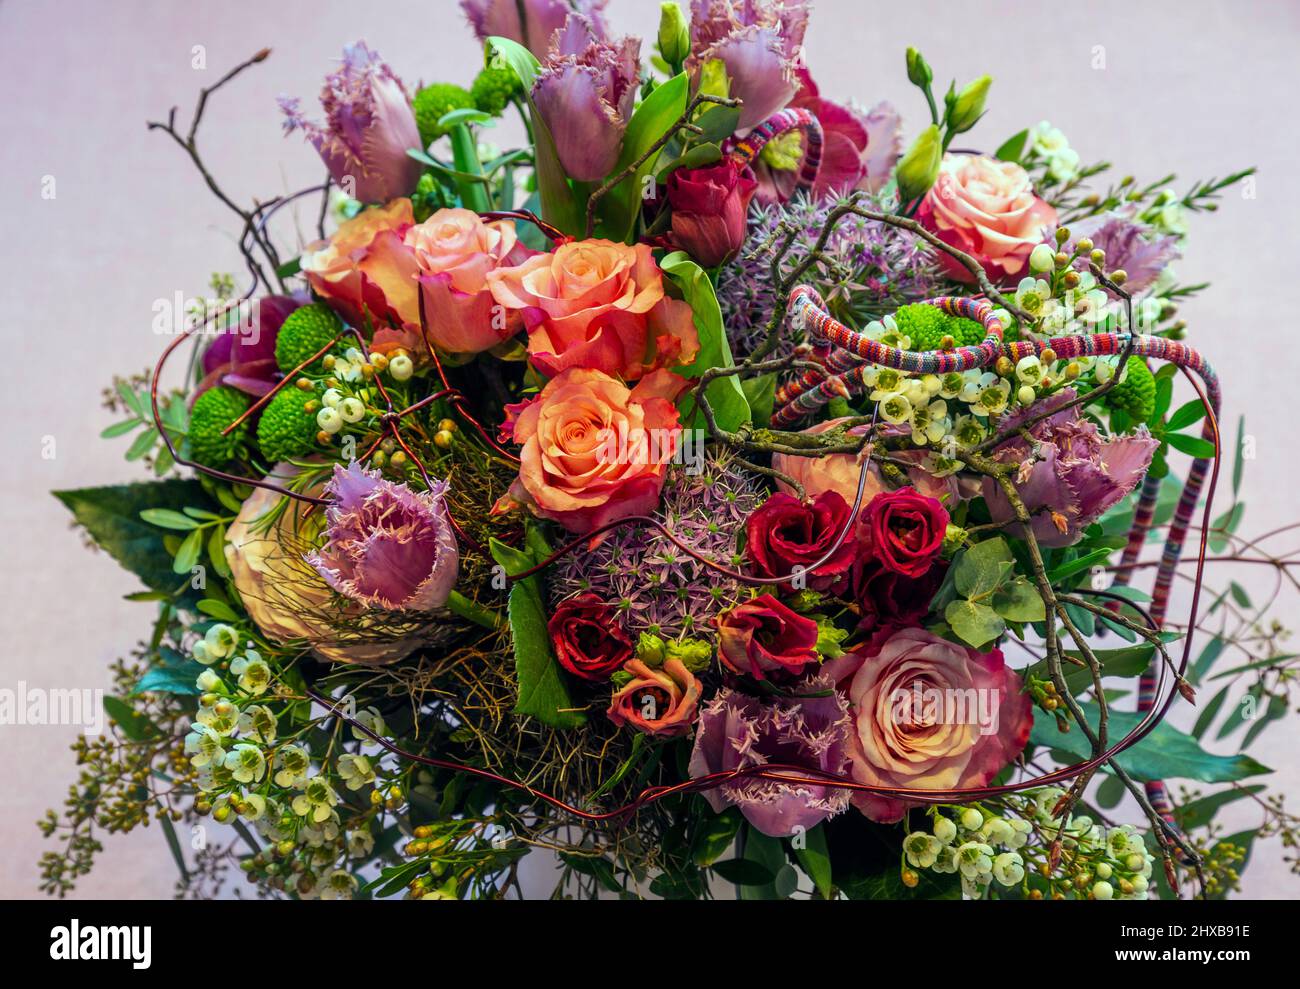 nature, plants, flowers, bunch of flowers, birthday bouquet, roses Stock Photo